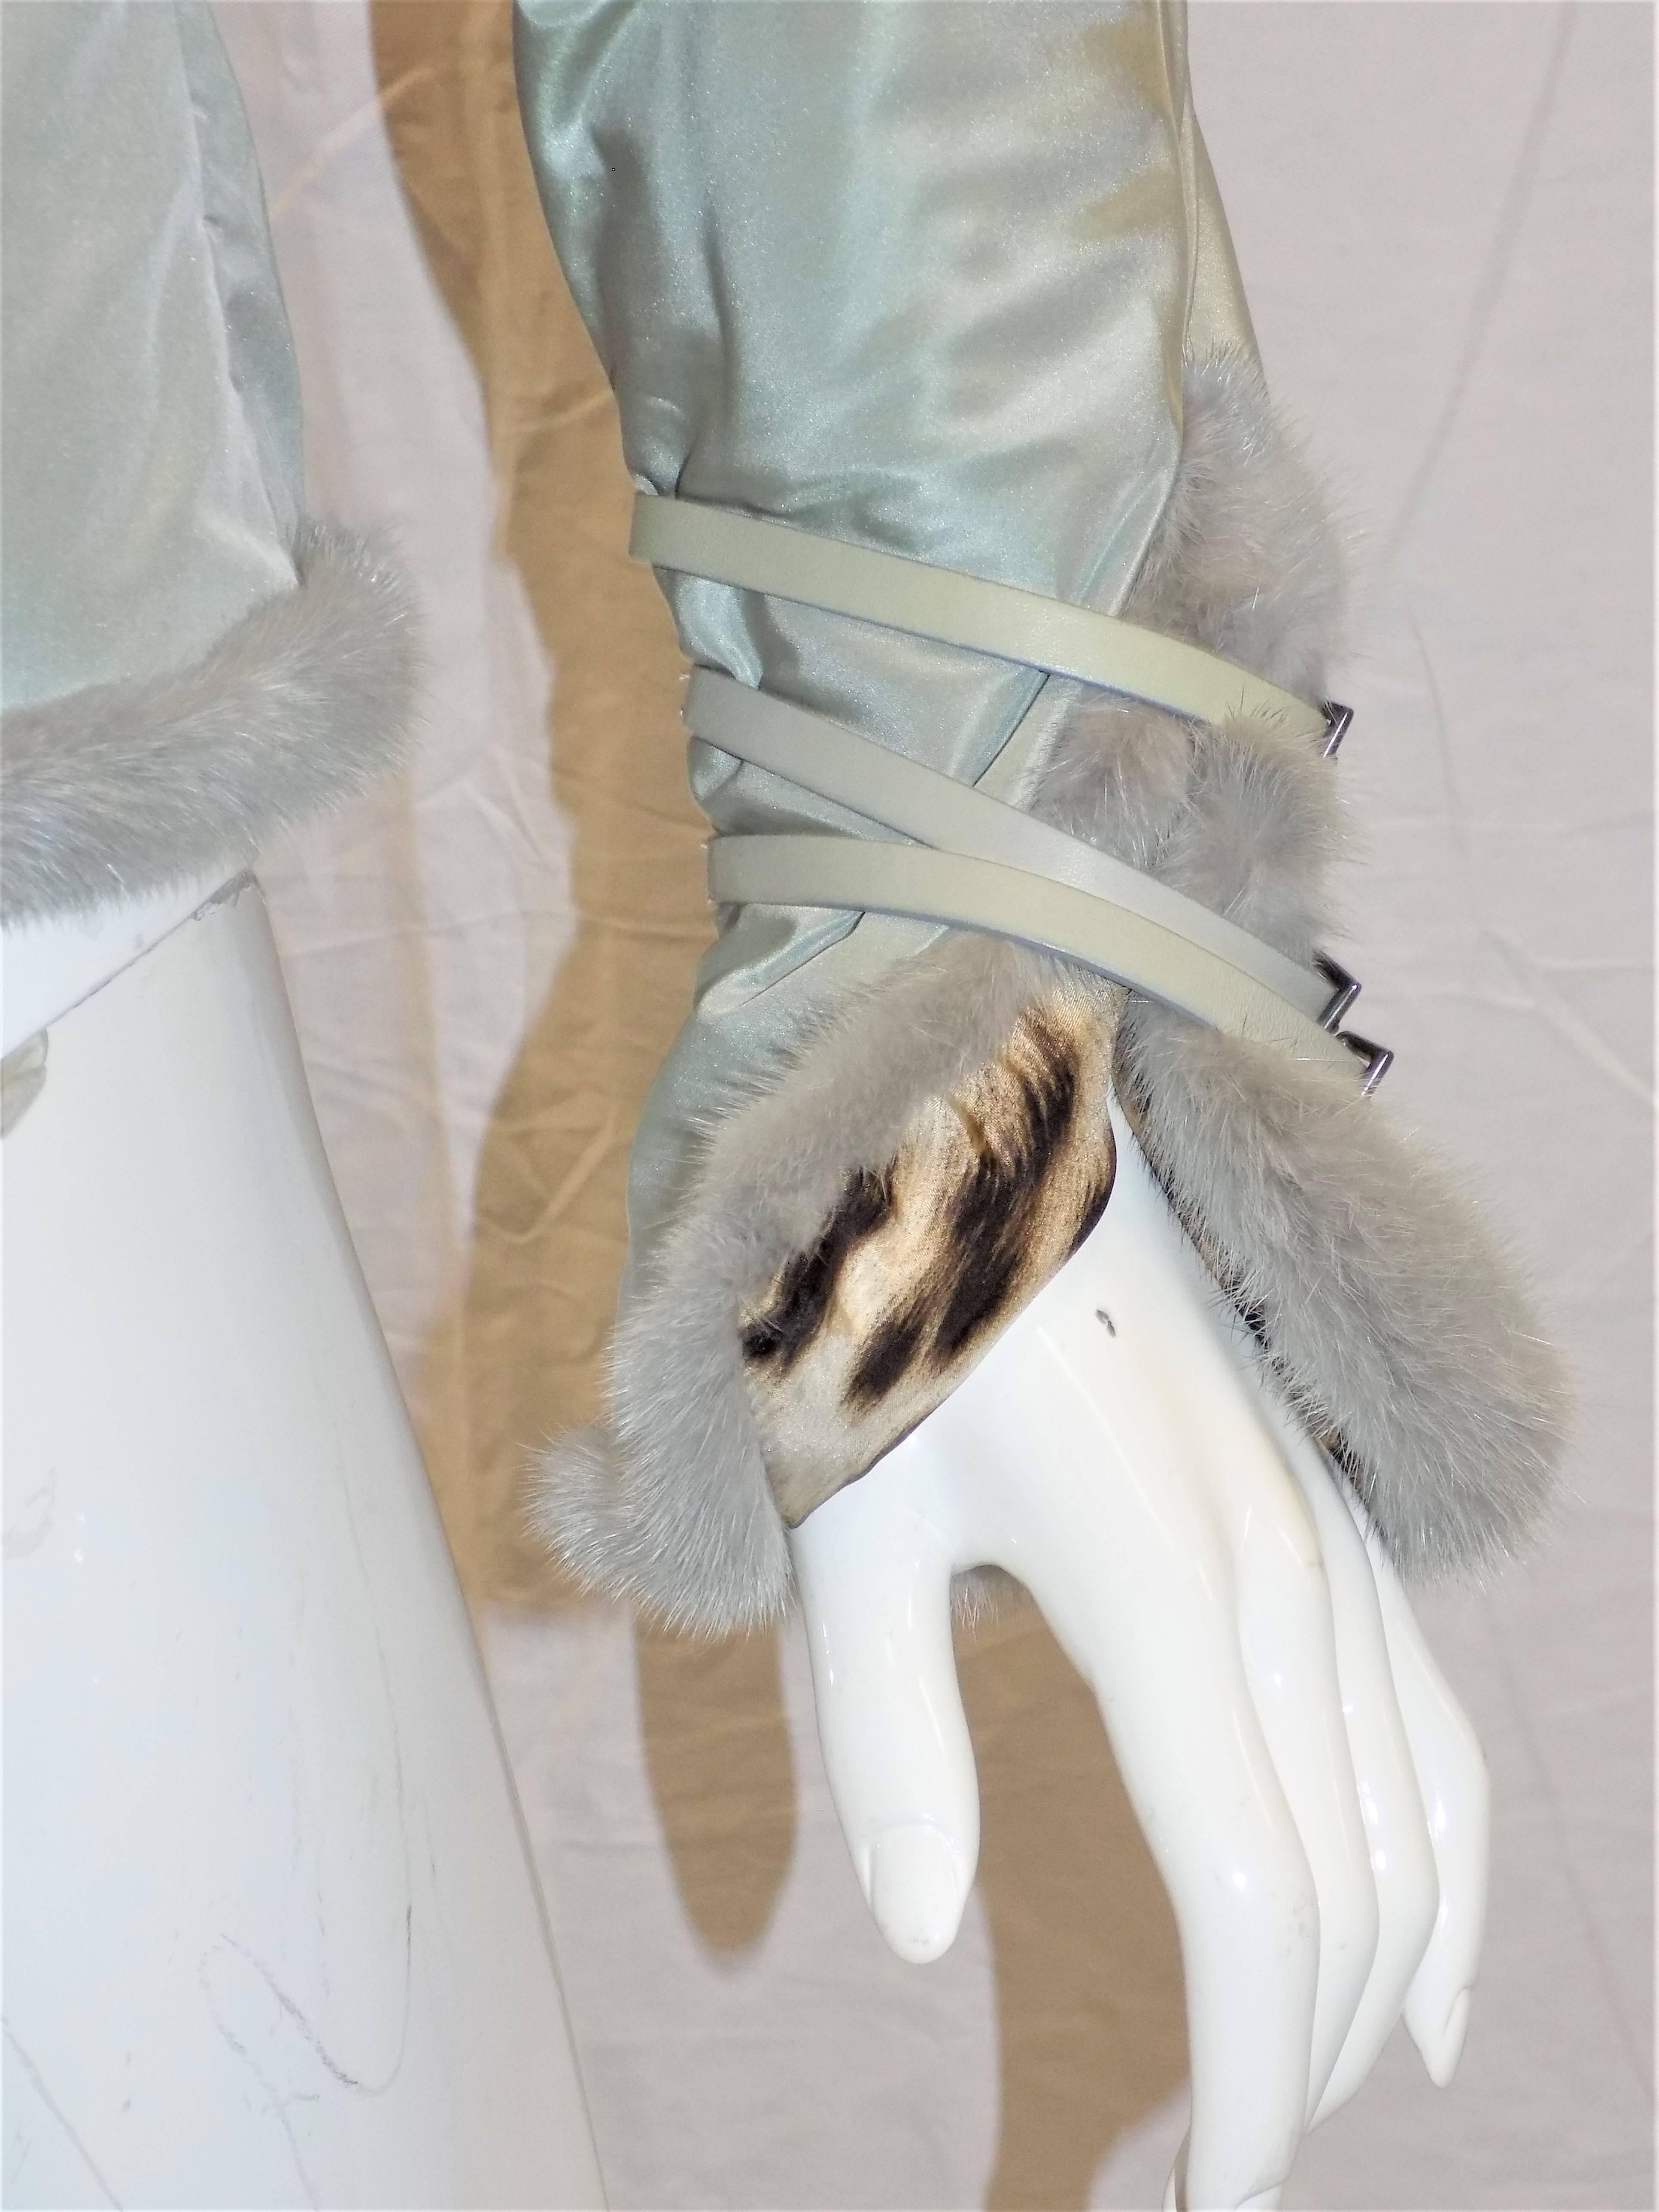 Guaranteed Authentic! Roberto Cavalli Grey Roberto Cavalli silk puffer leather and fur-trimmed jacket with rounded collar, long sleeves and concealed zip featuring sash tie belt closures at center front and sleeves Signature Leopard print lining.